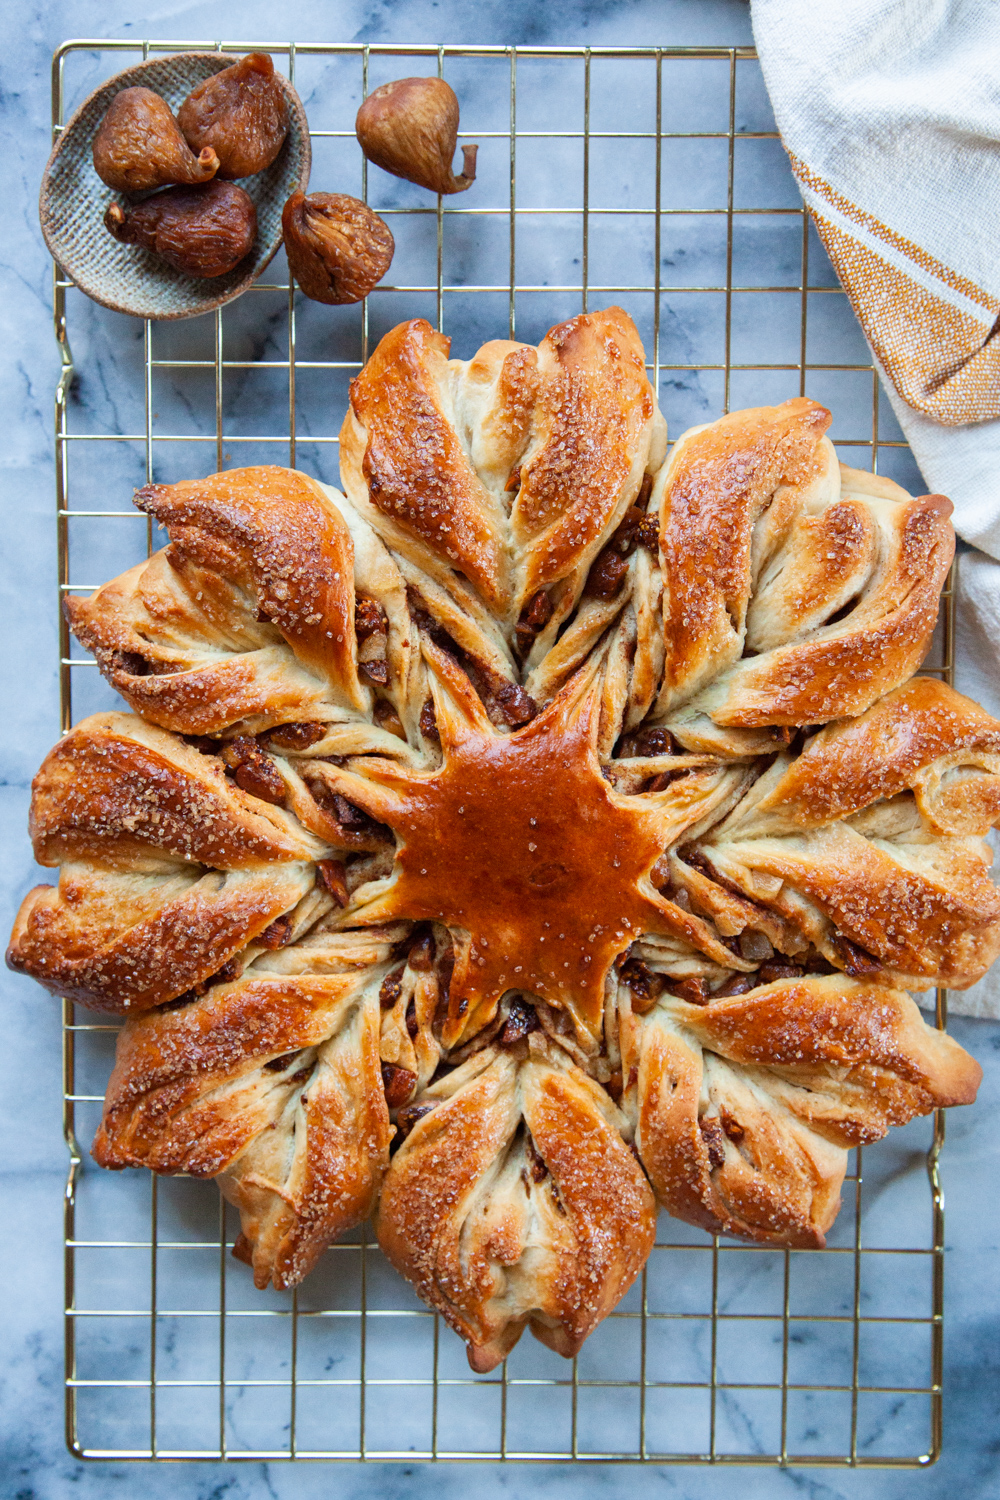 Cinnamon star bread on wire rack with Orchard Choice and Sun-Maid Golden Figs on the side in a bowl